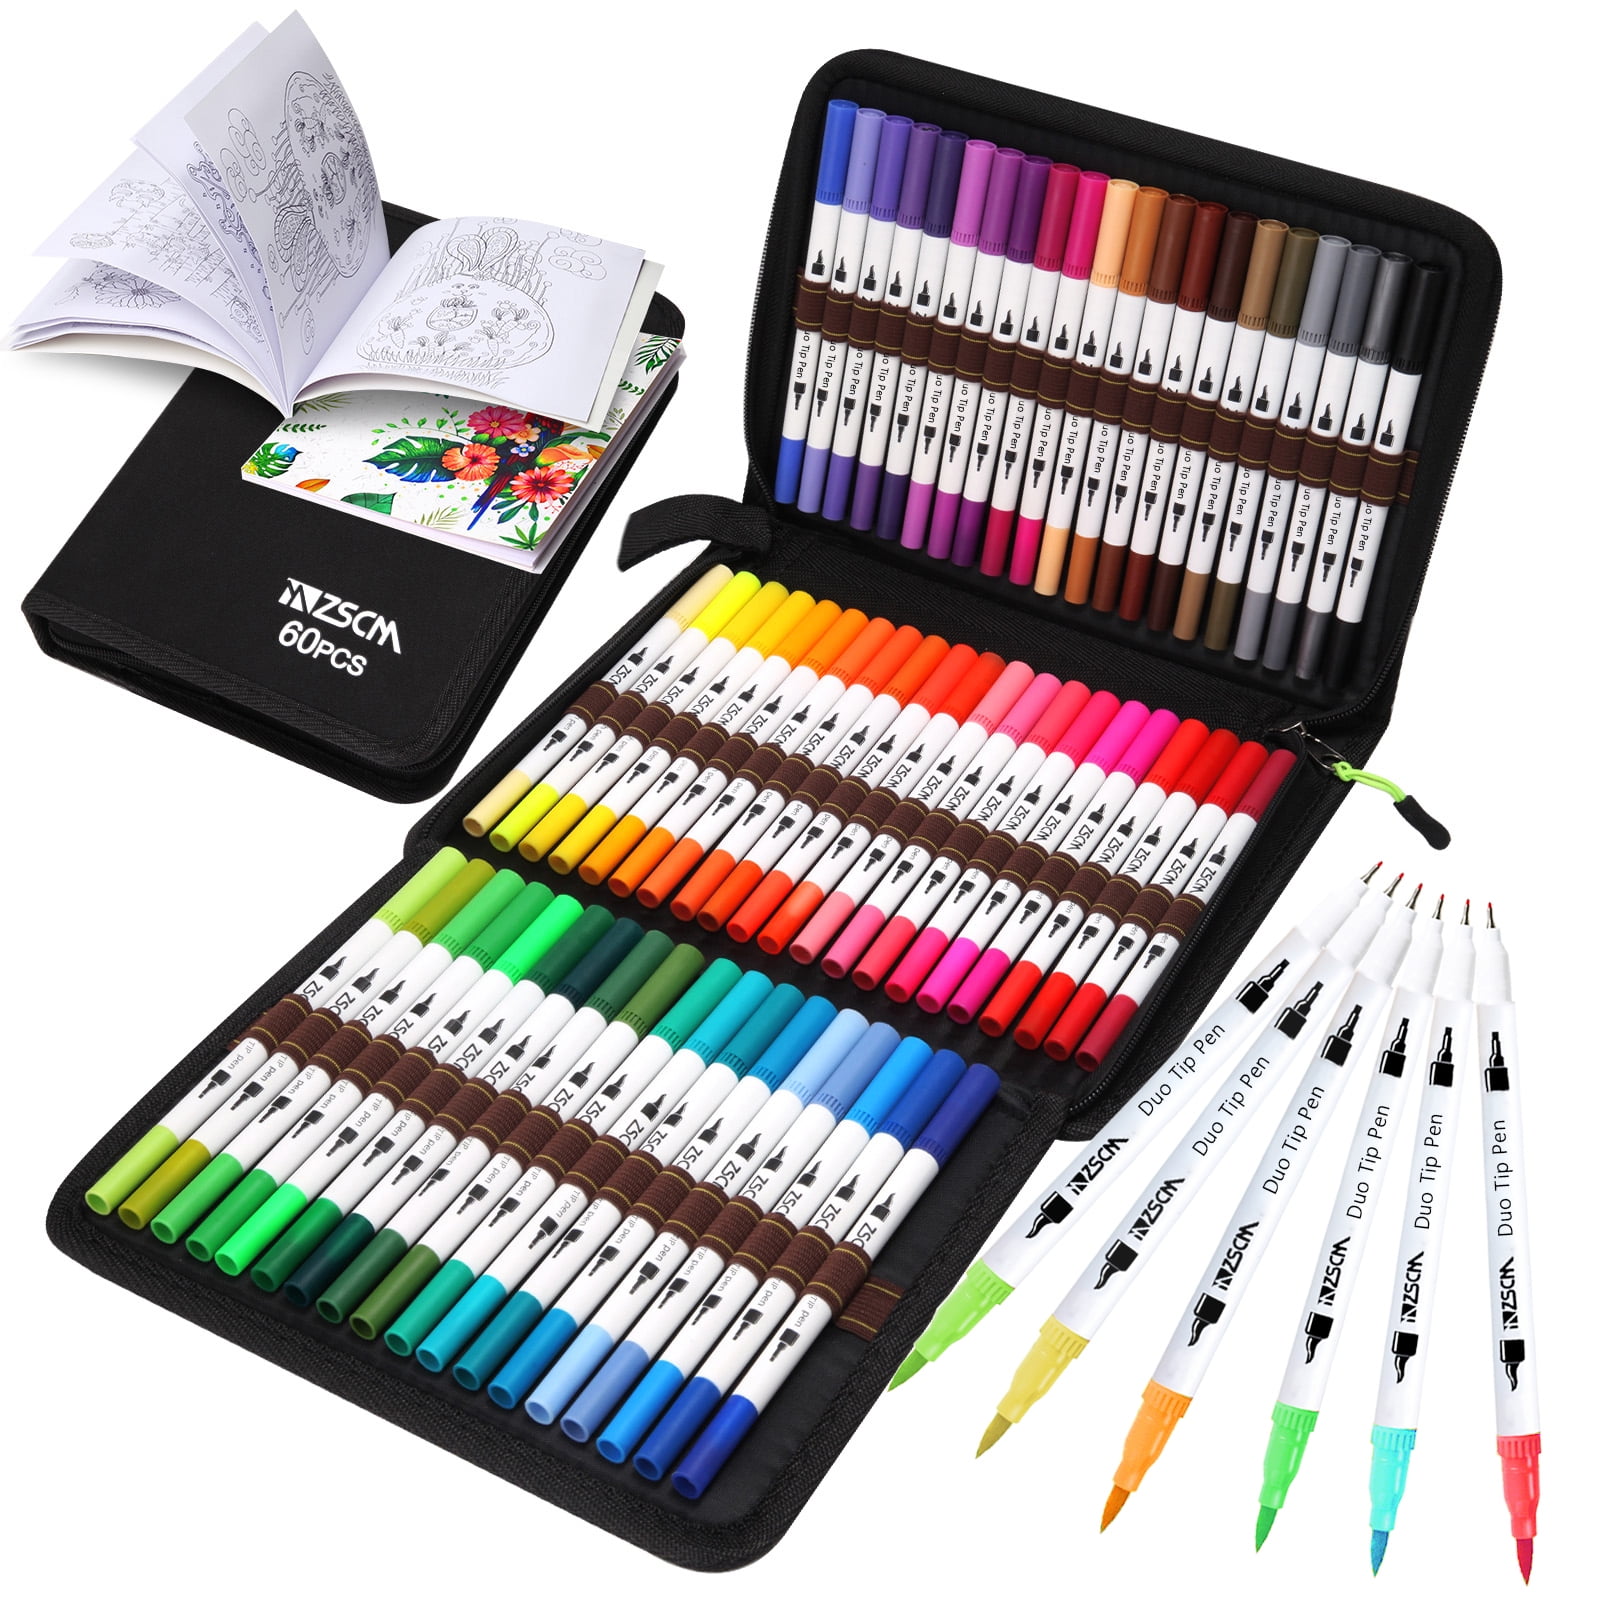 ZSCM Dual Tip Colored Brush Pens Art Markers Set, 36 Colors Fine Point Calligraphy Marker Journal Pens for Adult Coloring Books Drawing Bullet Journal